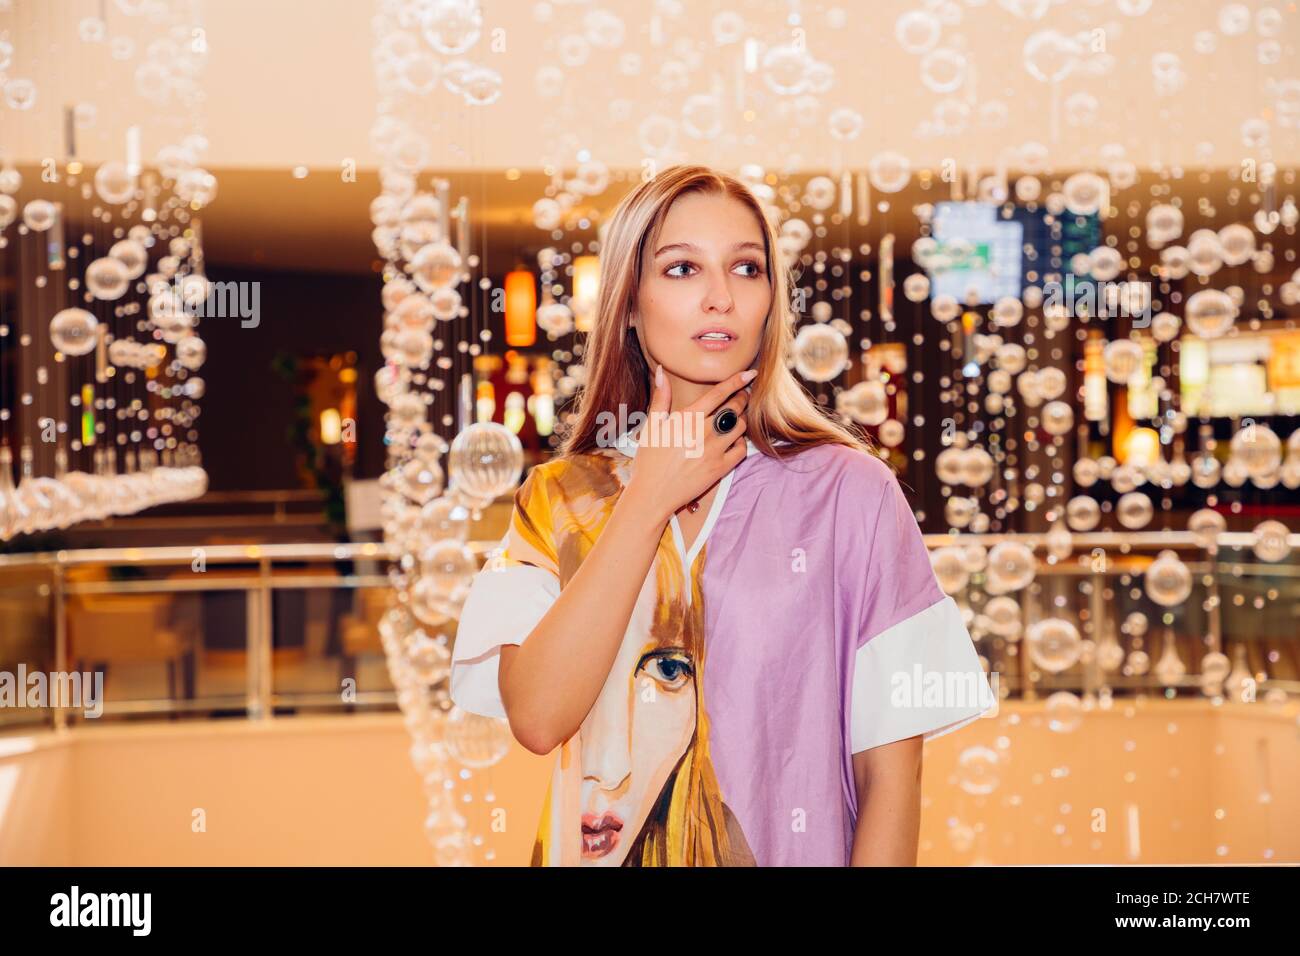 Girl in a colorful dress with a face (similar to hers) on it;she looks sidewards; in background glass balls are hanging from the ceiling as decoration Stock Photo